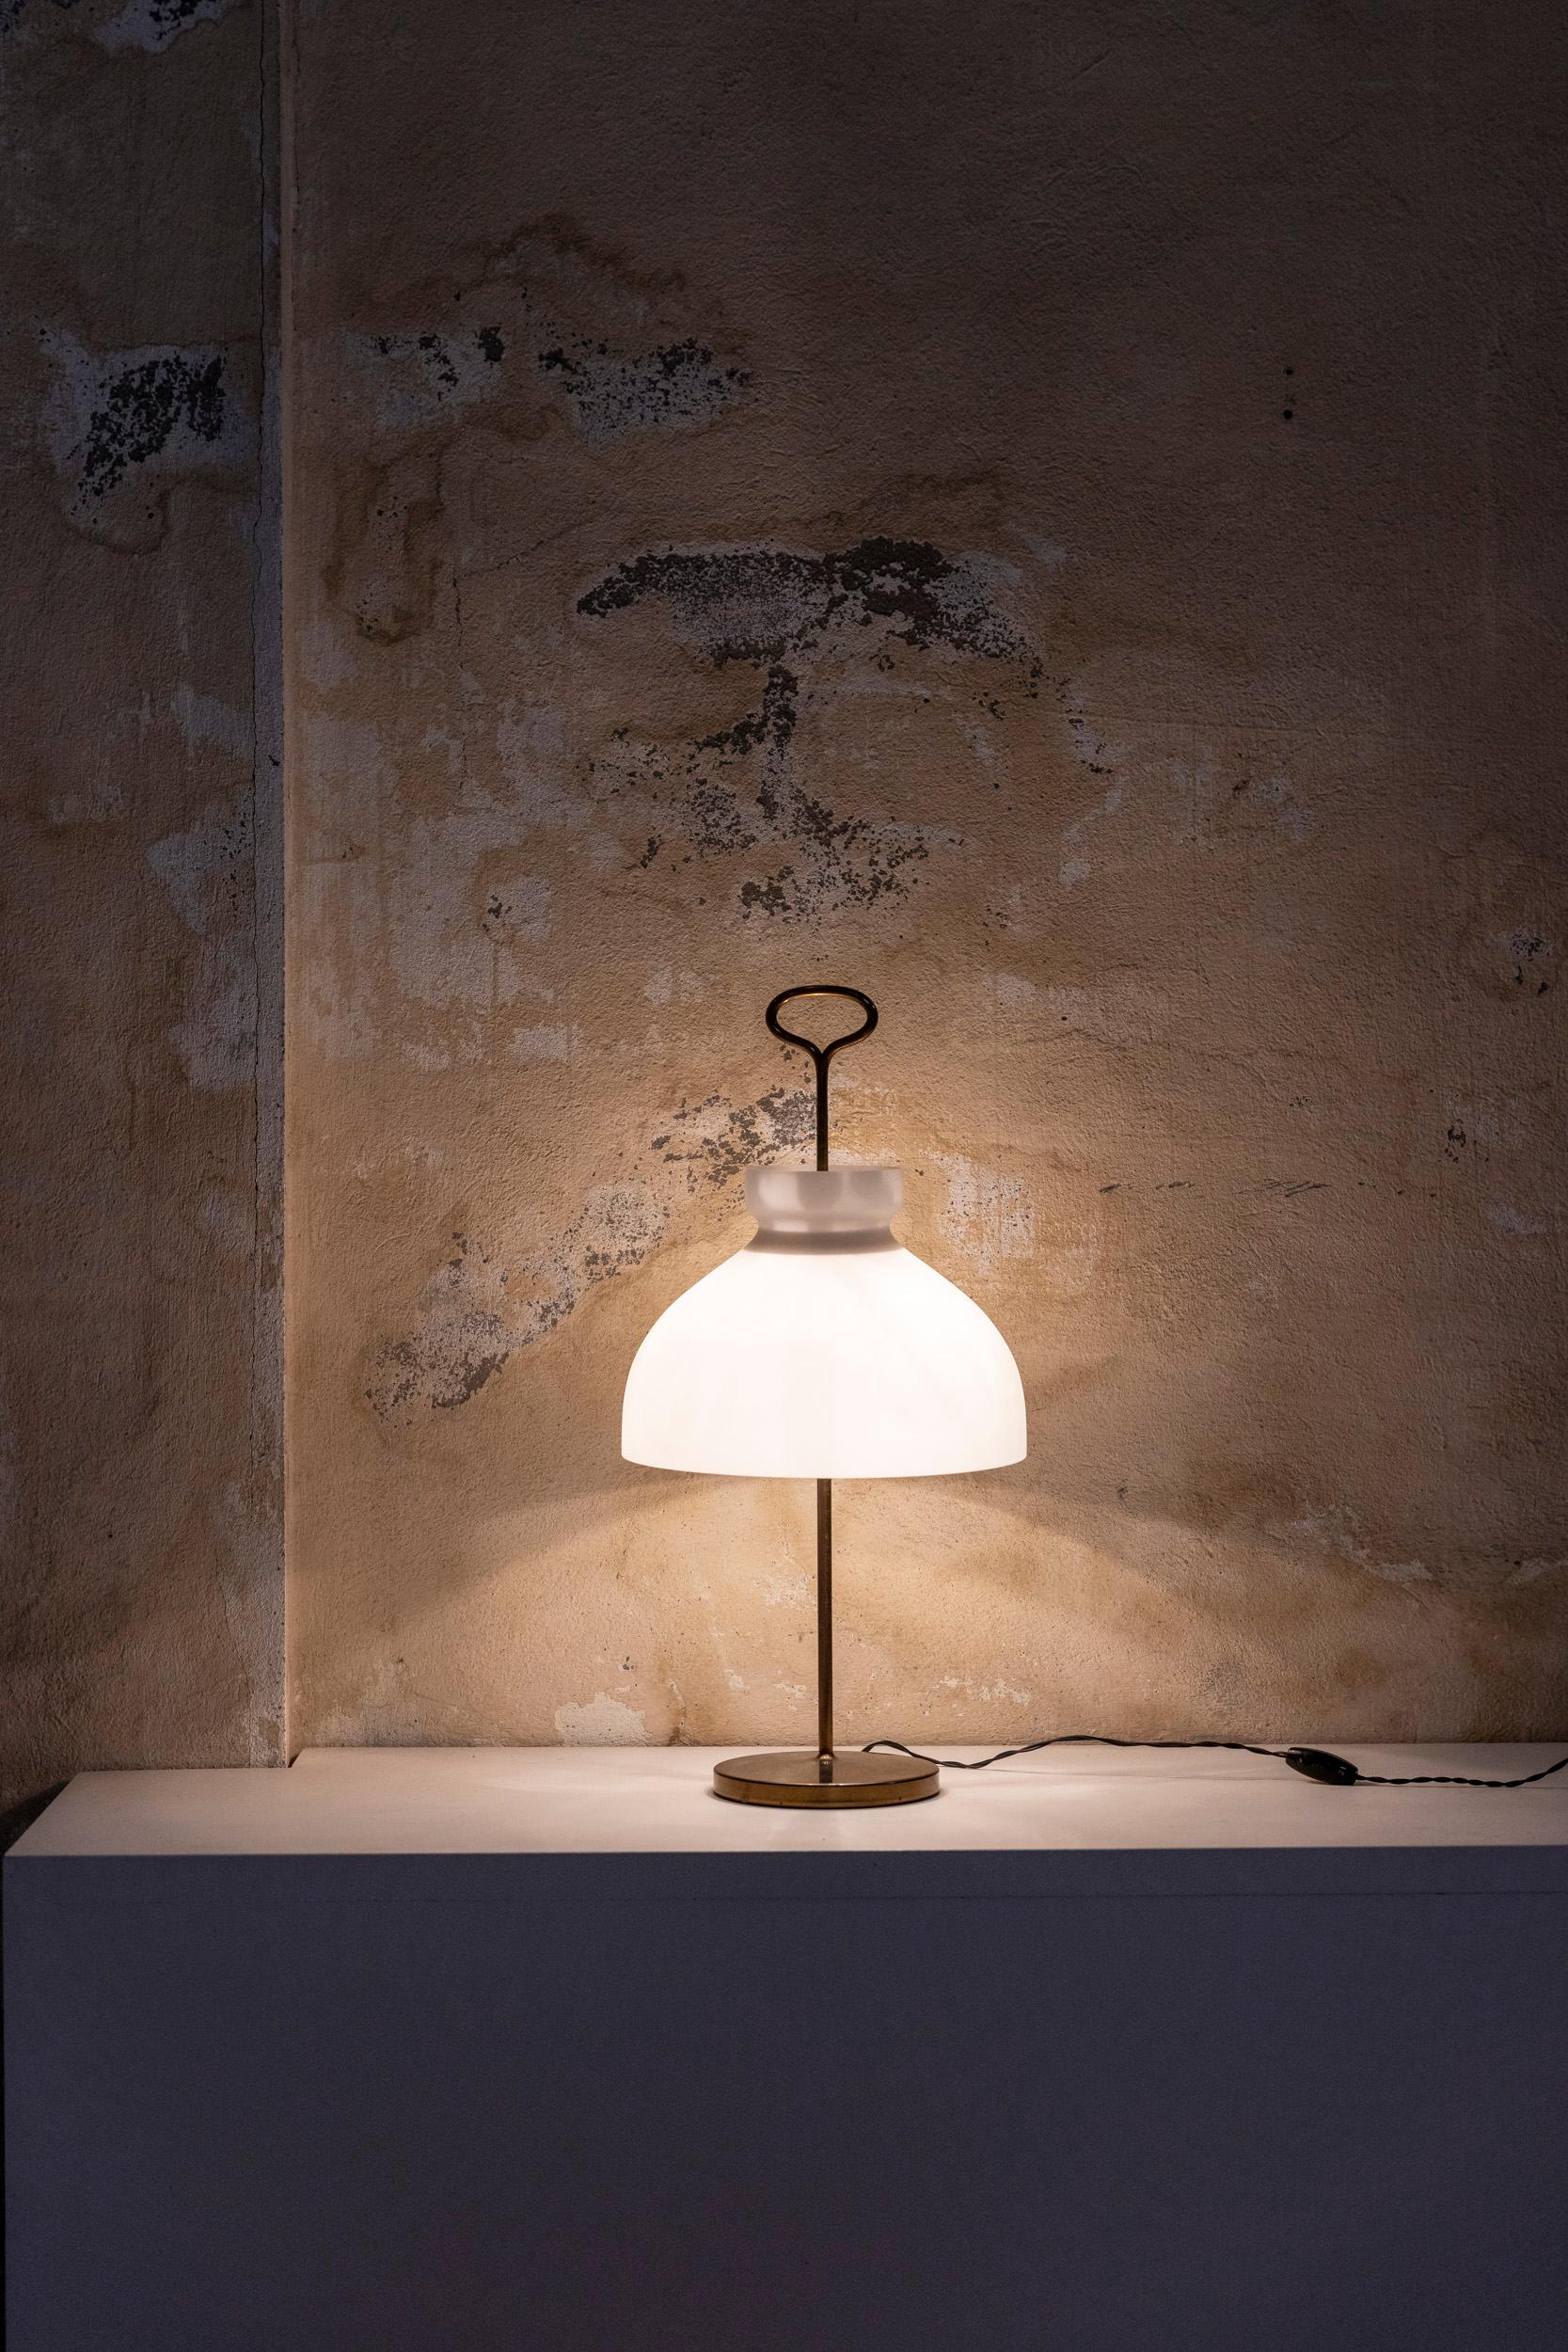 Iconic Arenzano table lamp by Ignazio Gardella for Azucena.
Original opaline glass lampshade mounted on golden brass structure with beautiful original patina, Italy 1956.